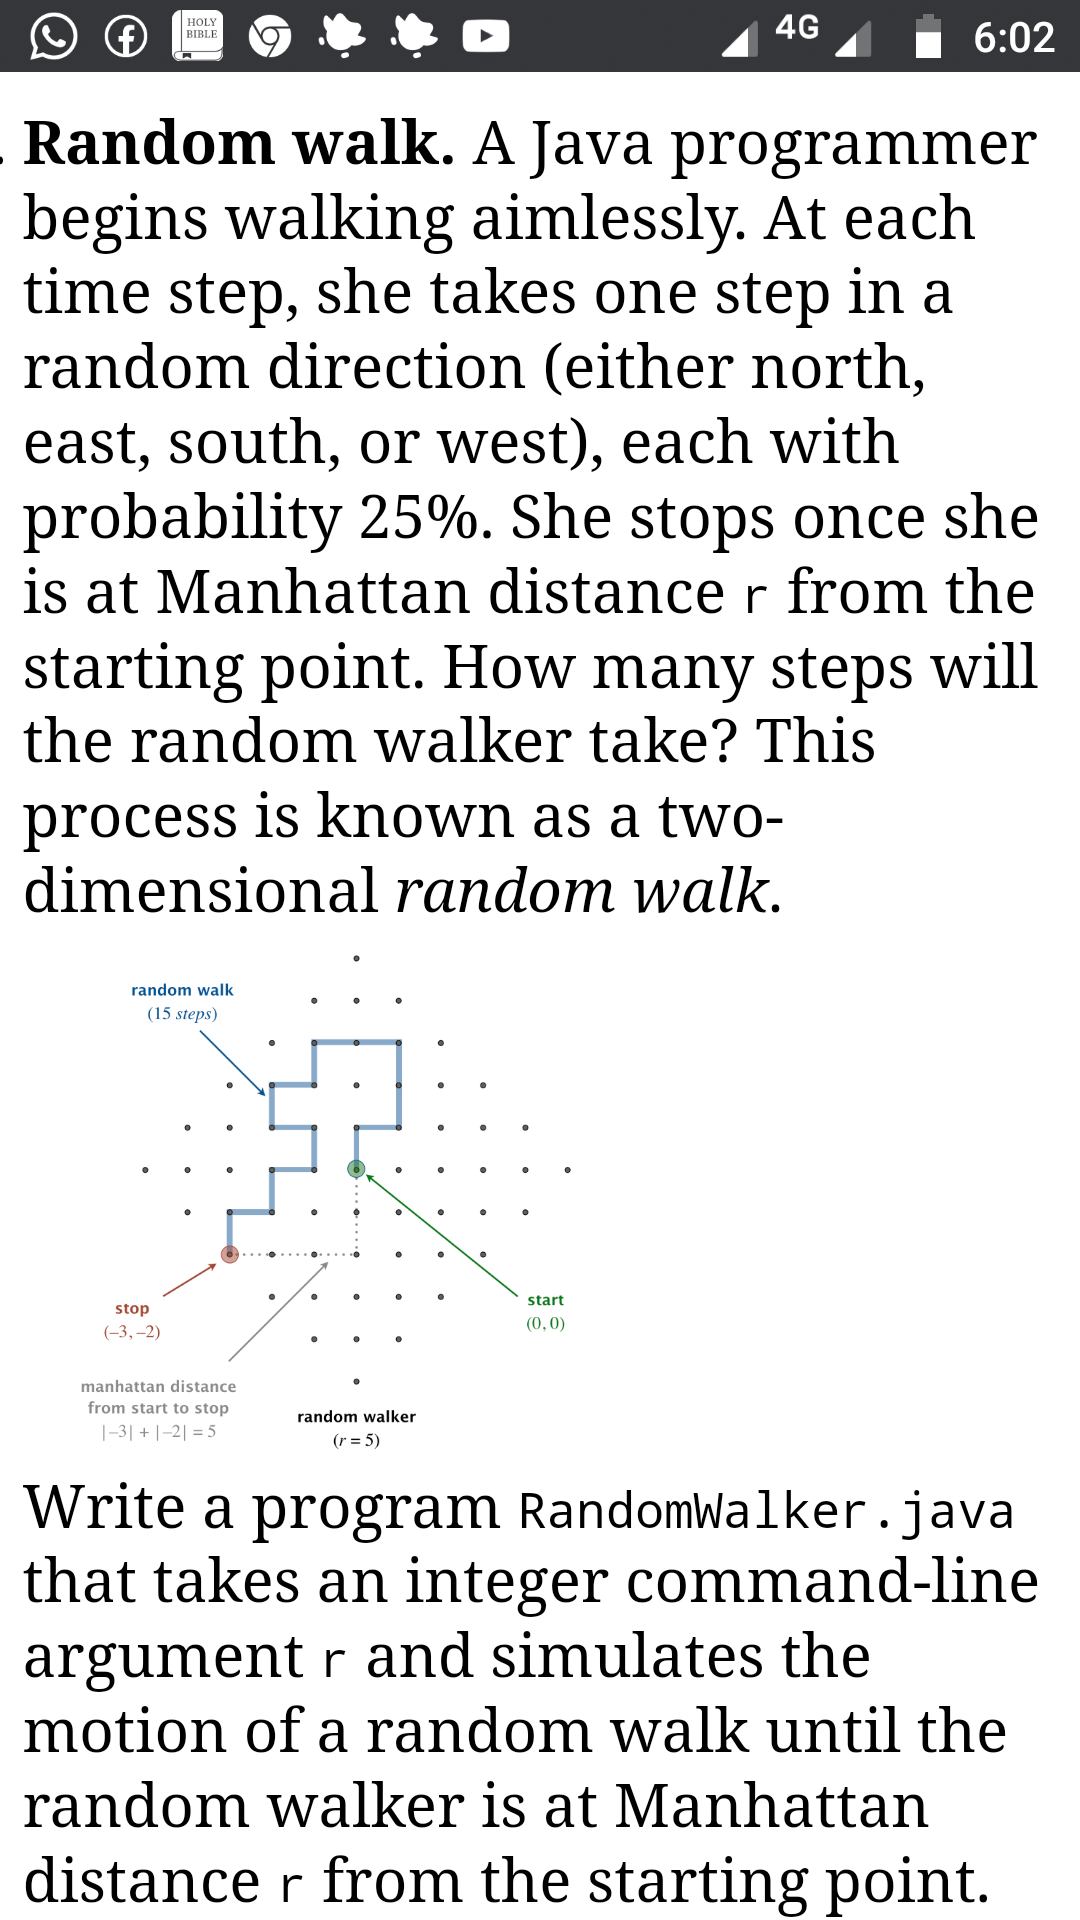 Random walk. A Java programmer
begins walking aimlessly. At each
time step, she takes one step in a
random direction (either north,
east, south, or west), each with
probability 25%. She stops once she
is at Manhattan distance r from the
starting point. How many steps will
the random walker take? This
process is known as a two-
dimensional random walk.
